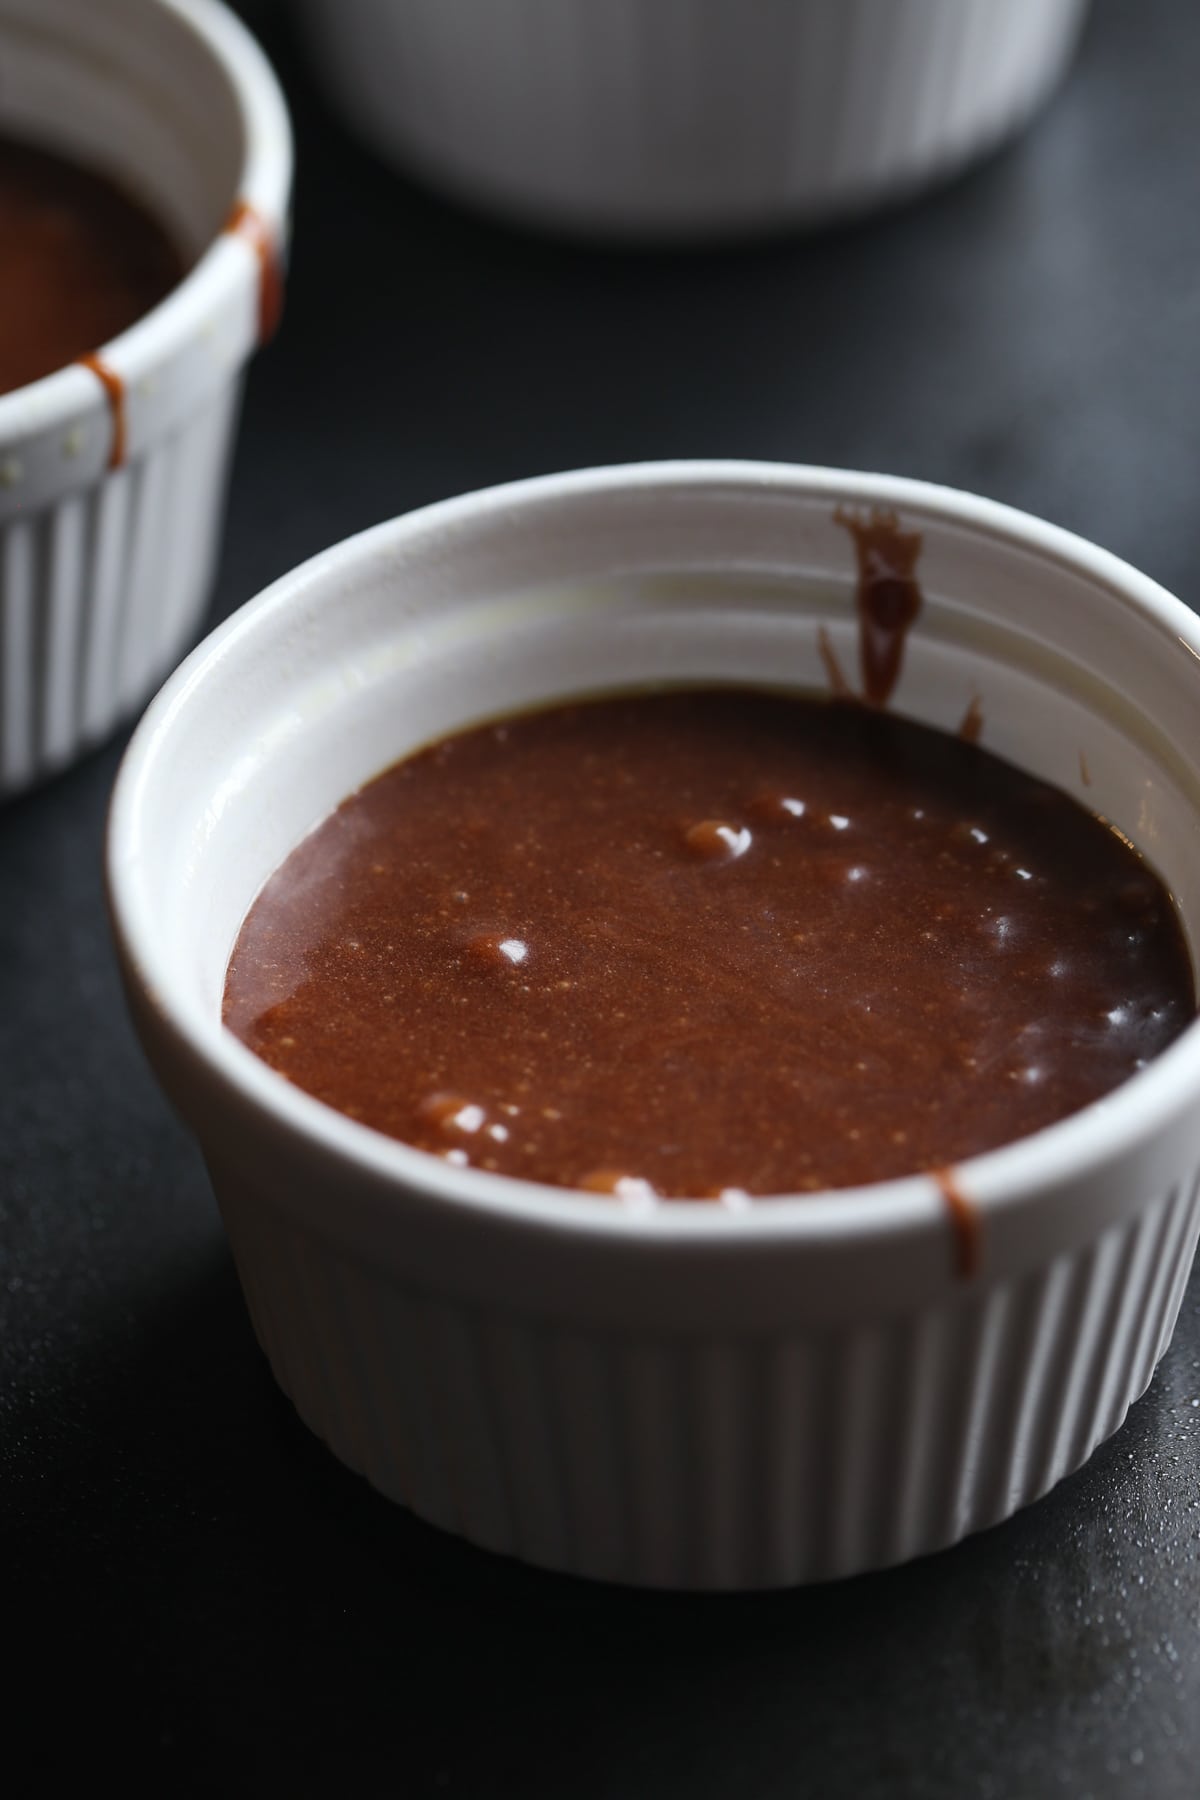 A white ramekin with chocolate cake batter inside before going into the oven.